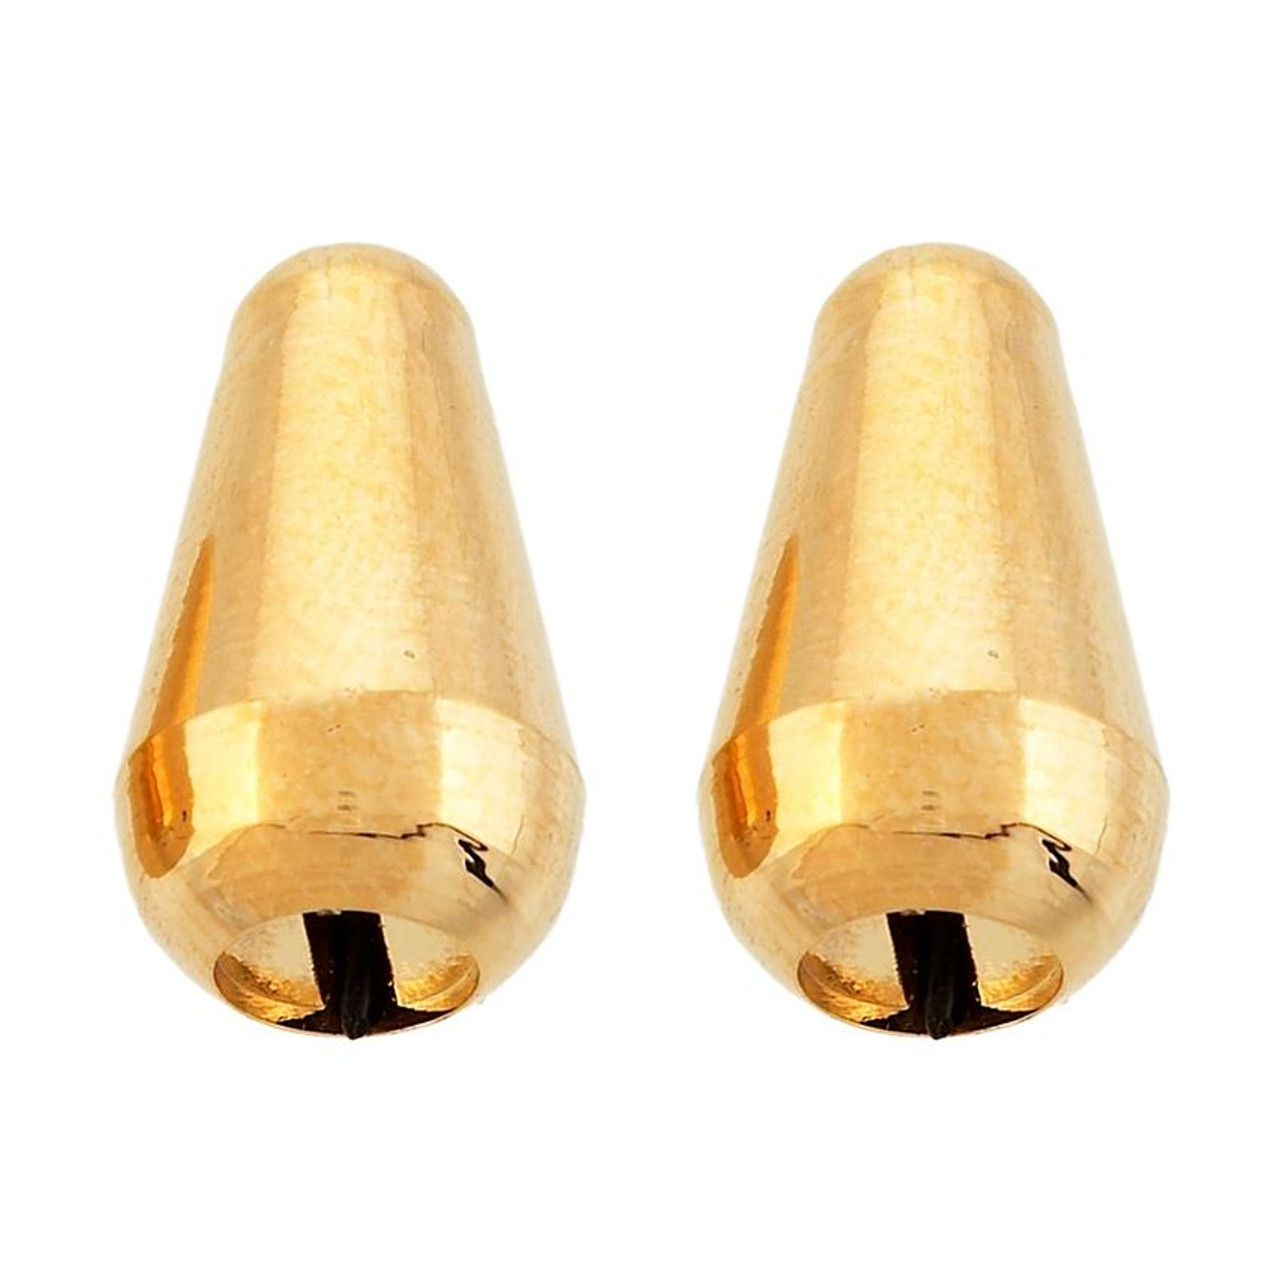 Gold Stratocaster/Strat Guitar USA Switch Tip Knobs - Set of 2